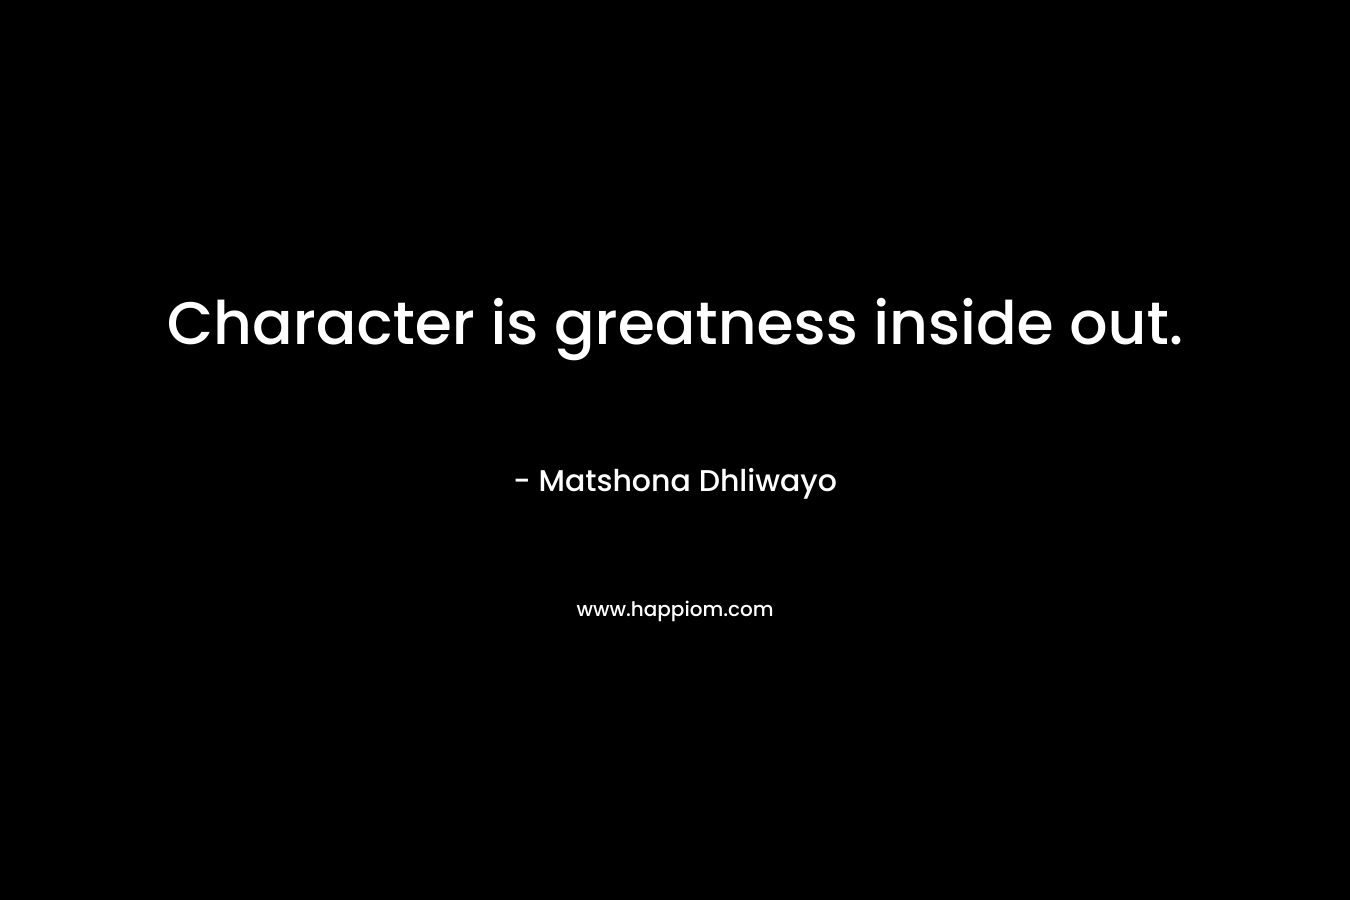 Character is greatness inside out.